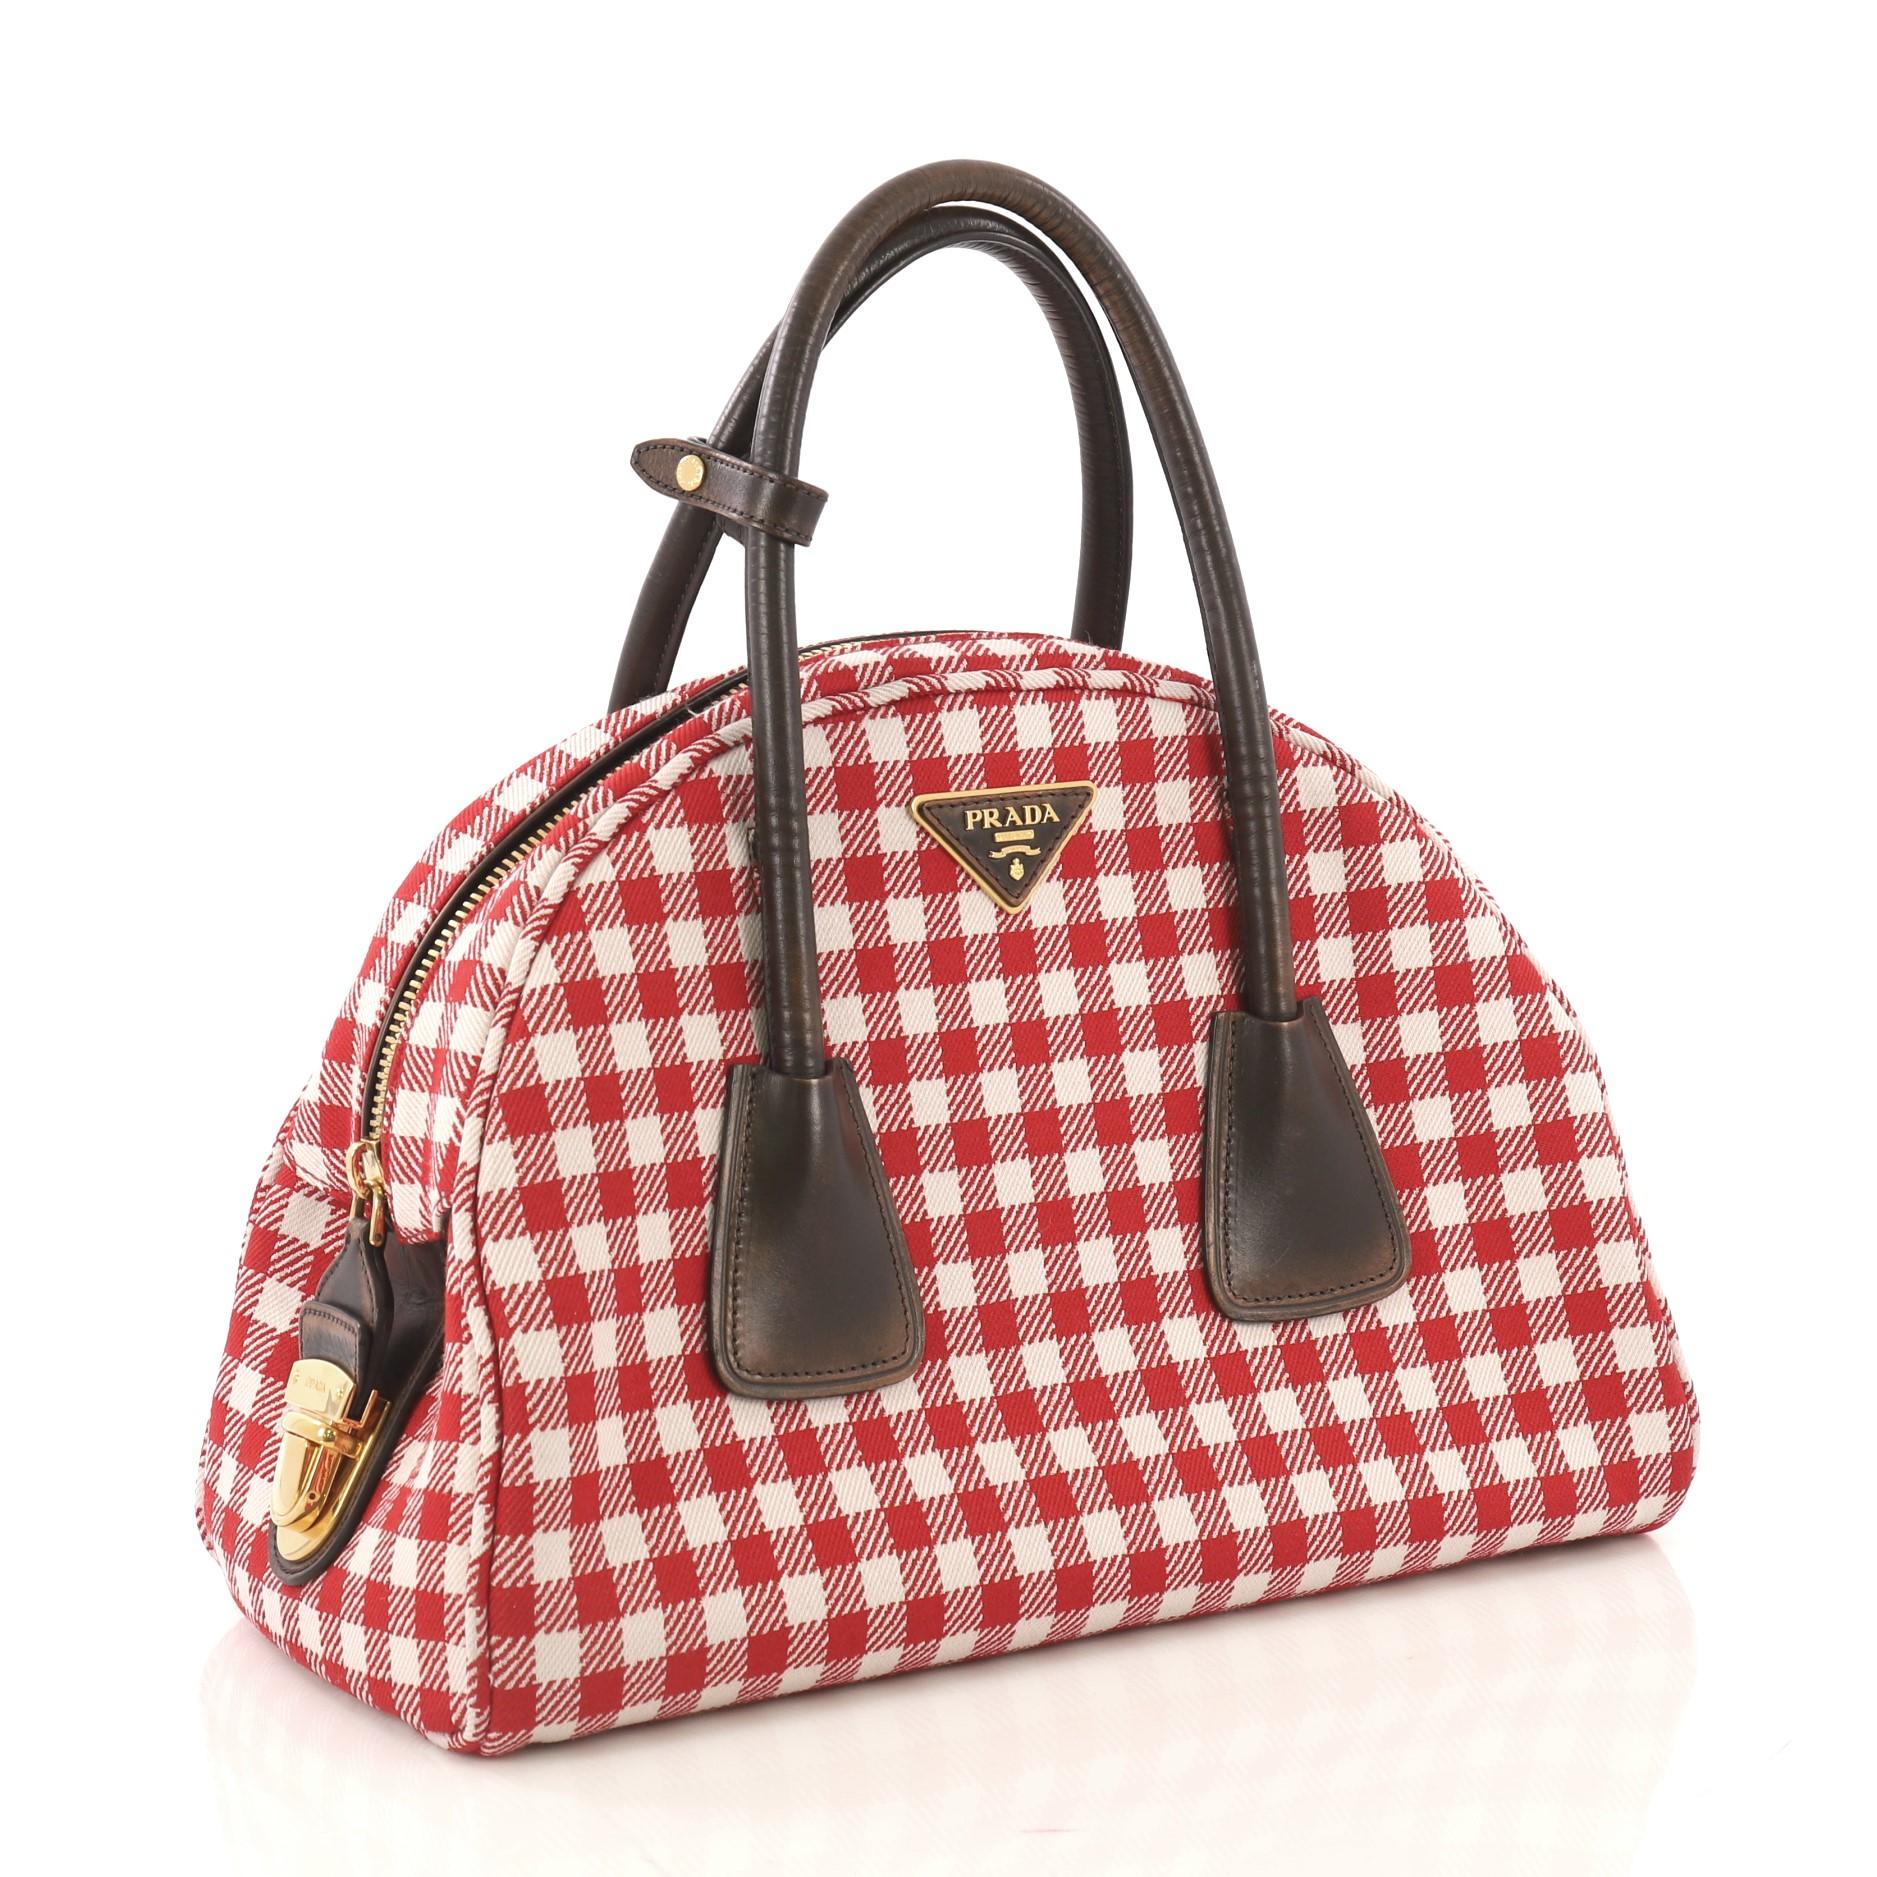 This Prada Vichy Vintage Bowler Bag Jacquard Large, crafted from red and white jacquard, features dual rolled handles, triangular Prada logo at top center, protective base studs and aged gold-tone hardware. Its zip closure with push-lock opens to a